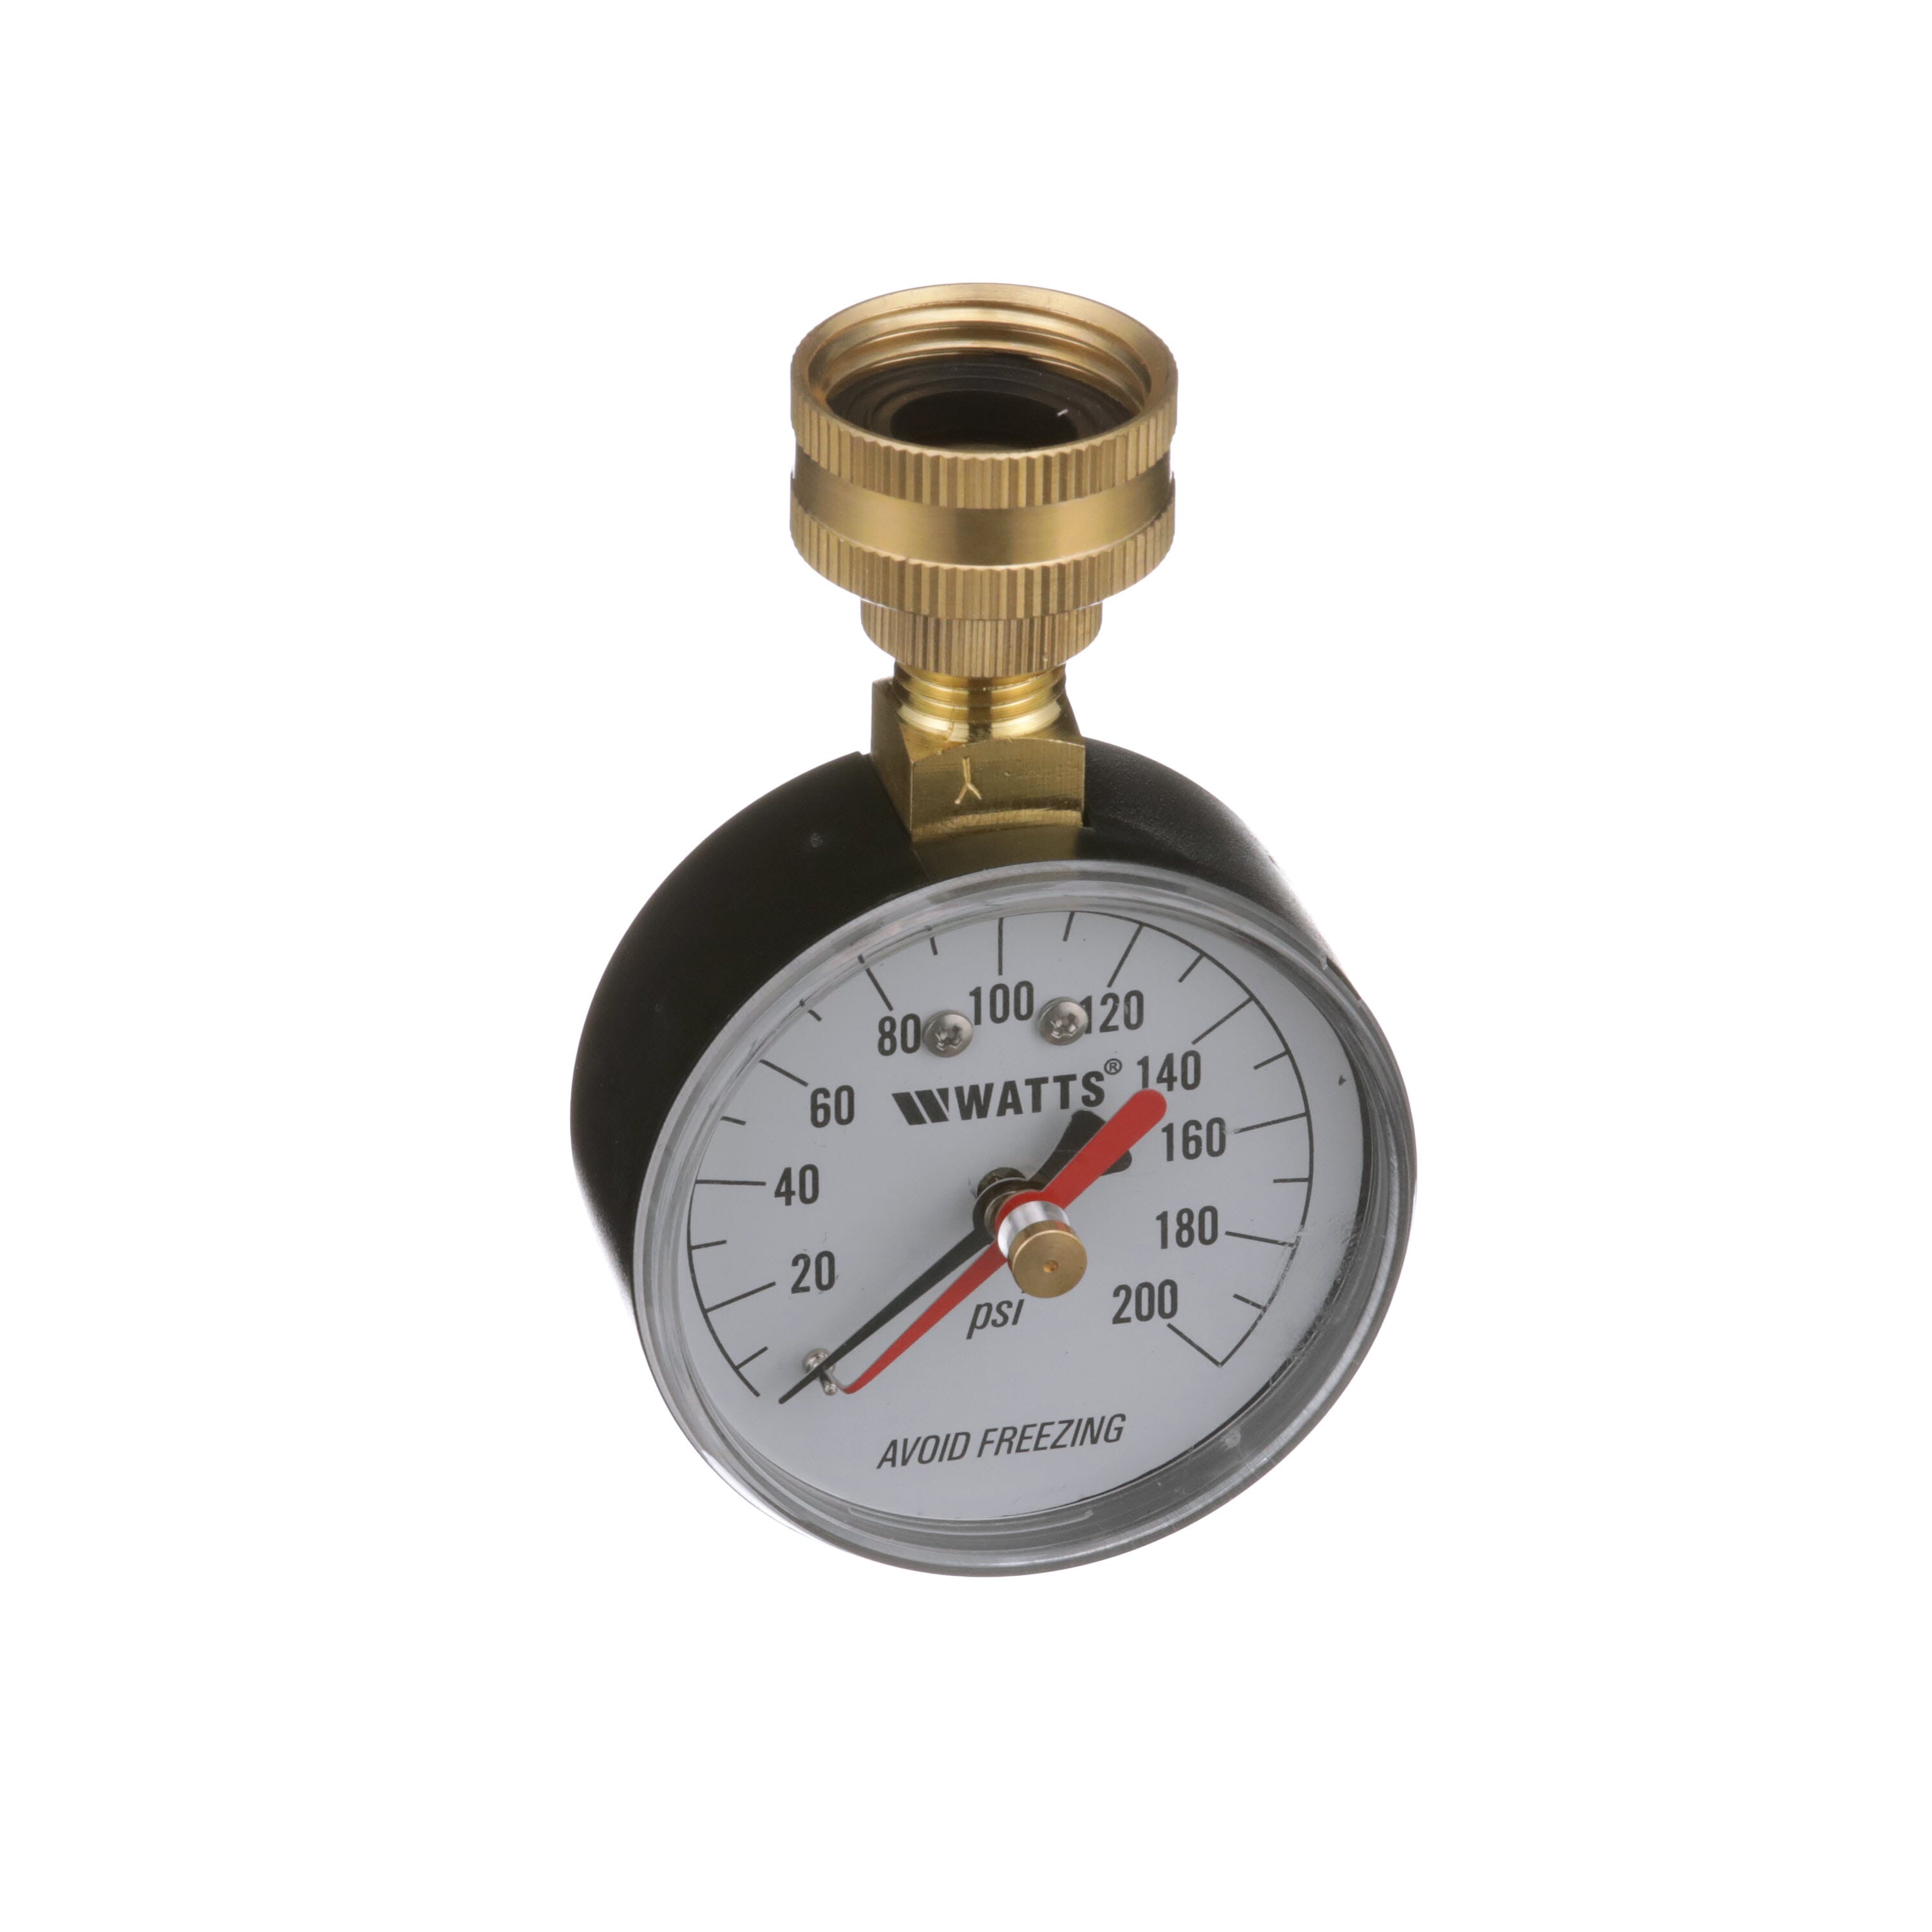 P2A Water Pressure Test Gauge G2022-300W 2-1/2 Inch 300 PSI 3/4 Inch GHT 